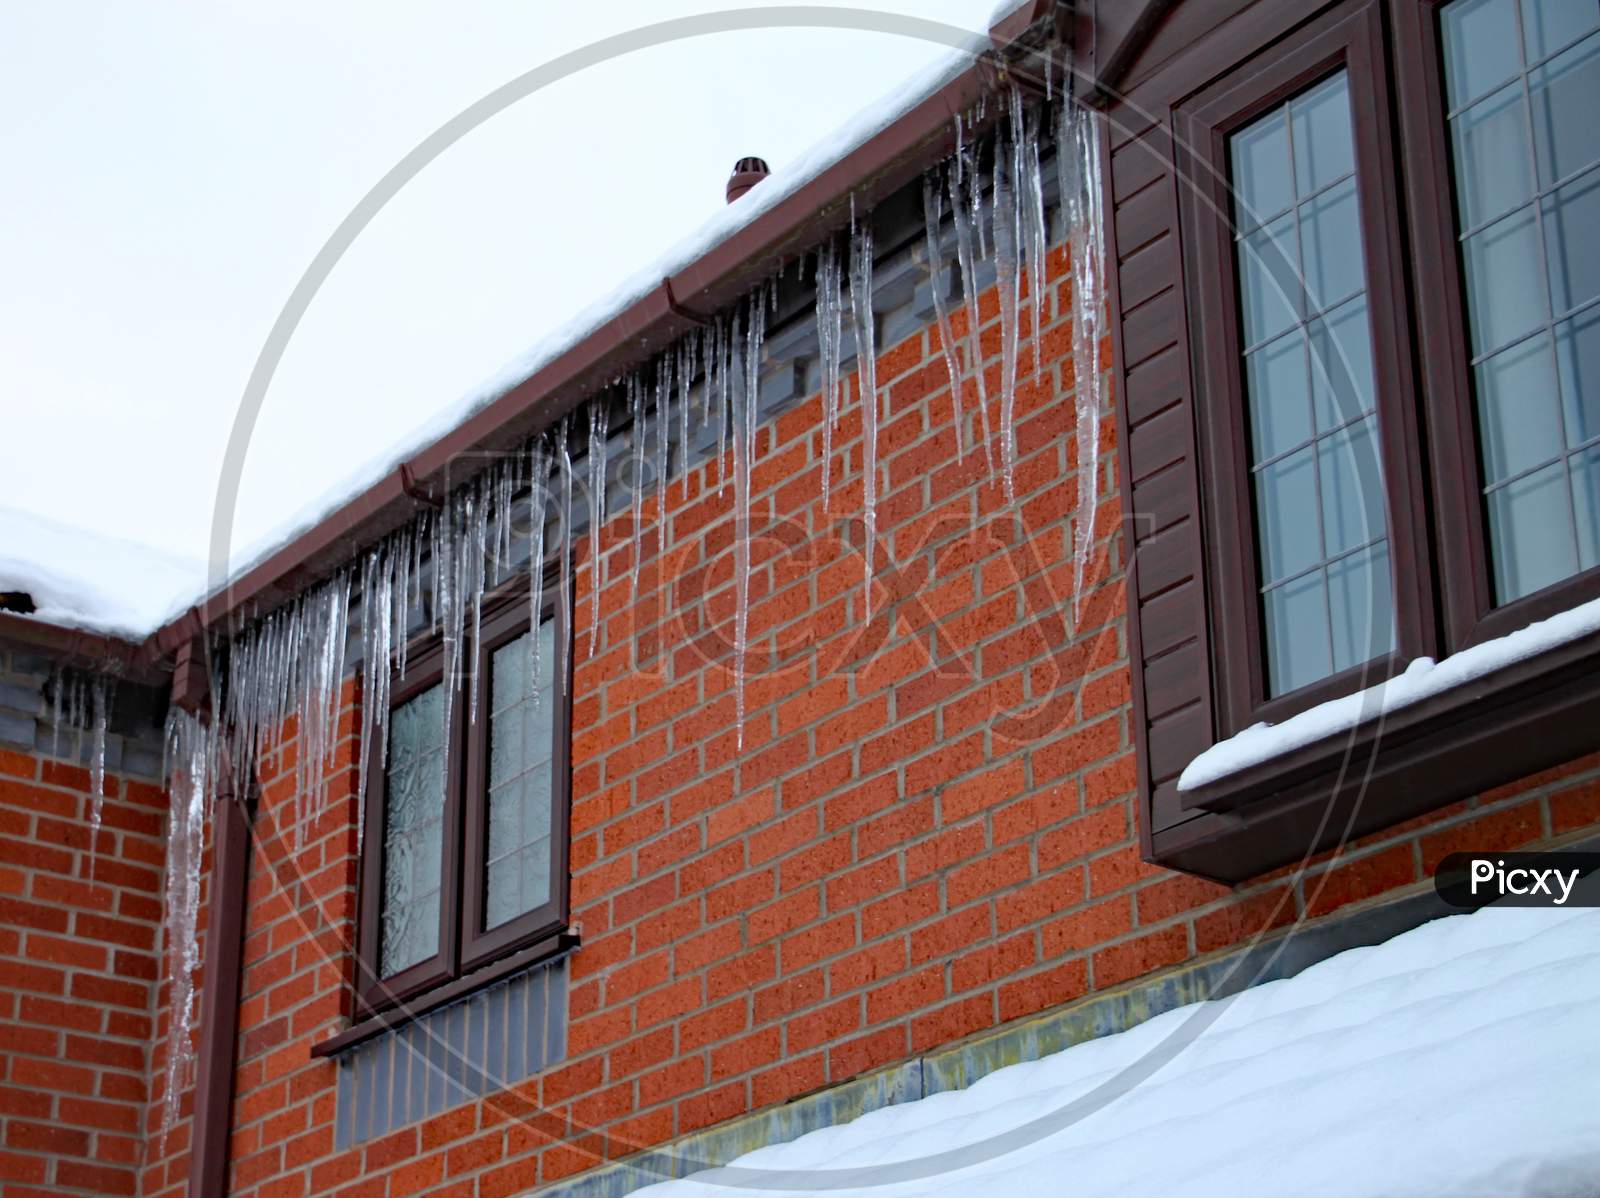 Long Icicles Hang From The Gutter Of A House. The Roof Is Covered In Snow And It'S Still Snowing